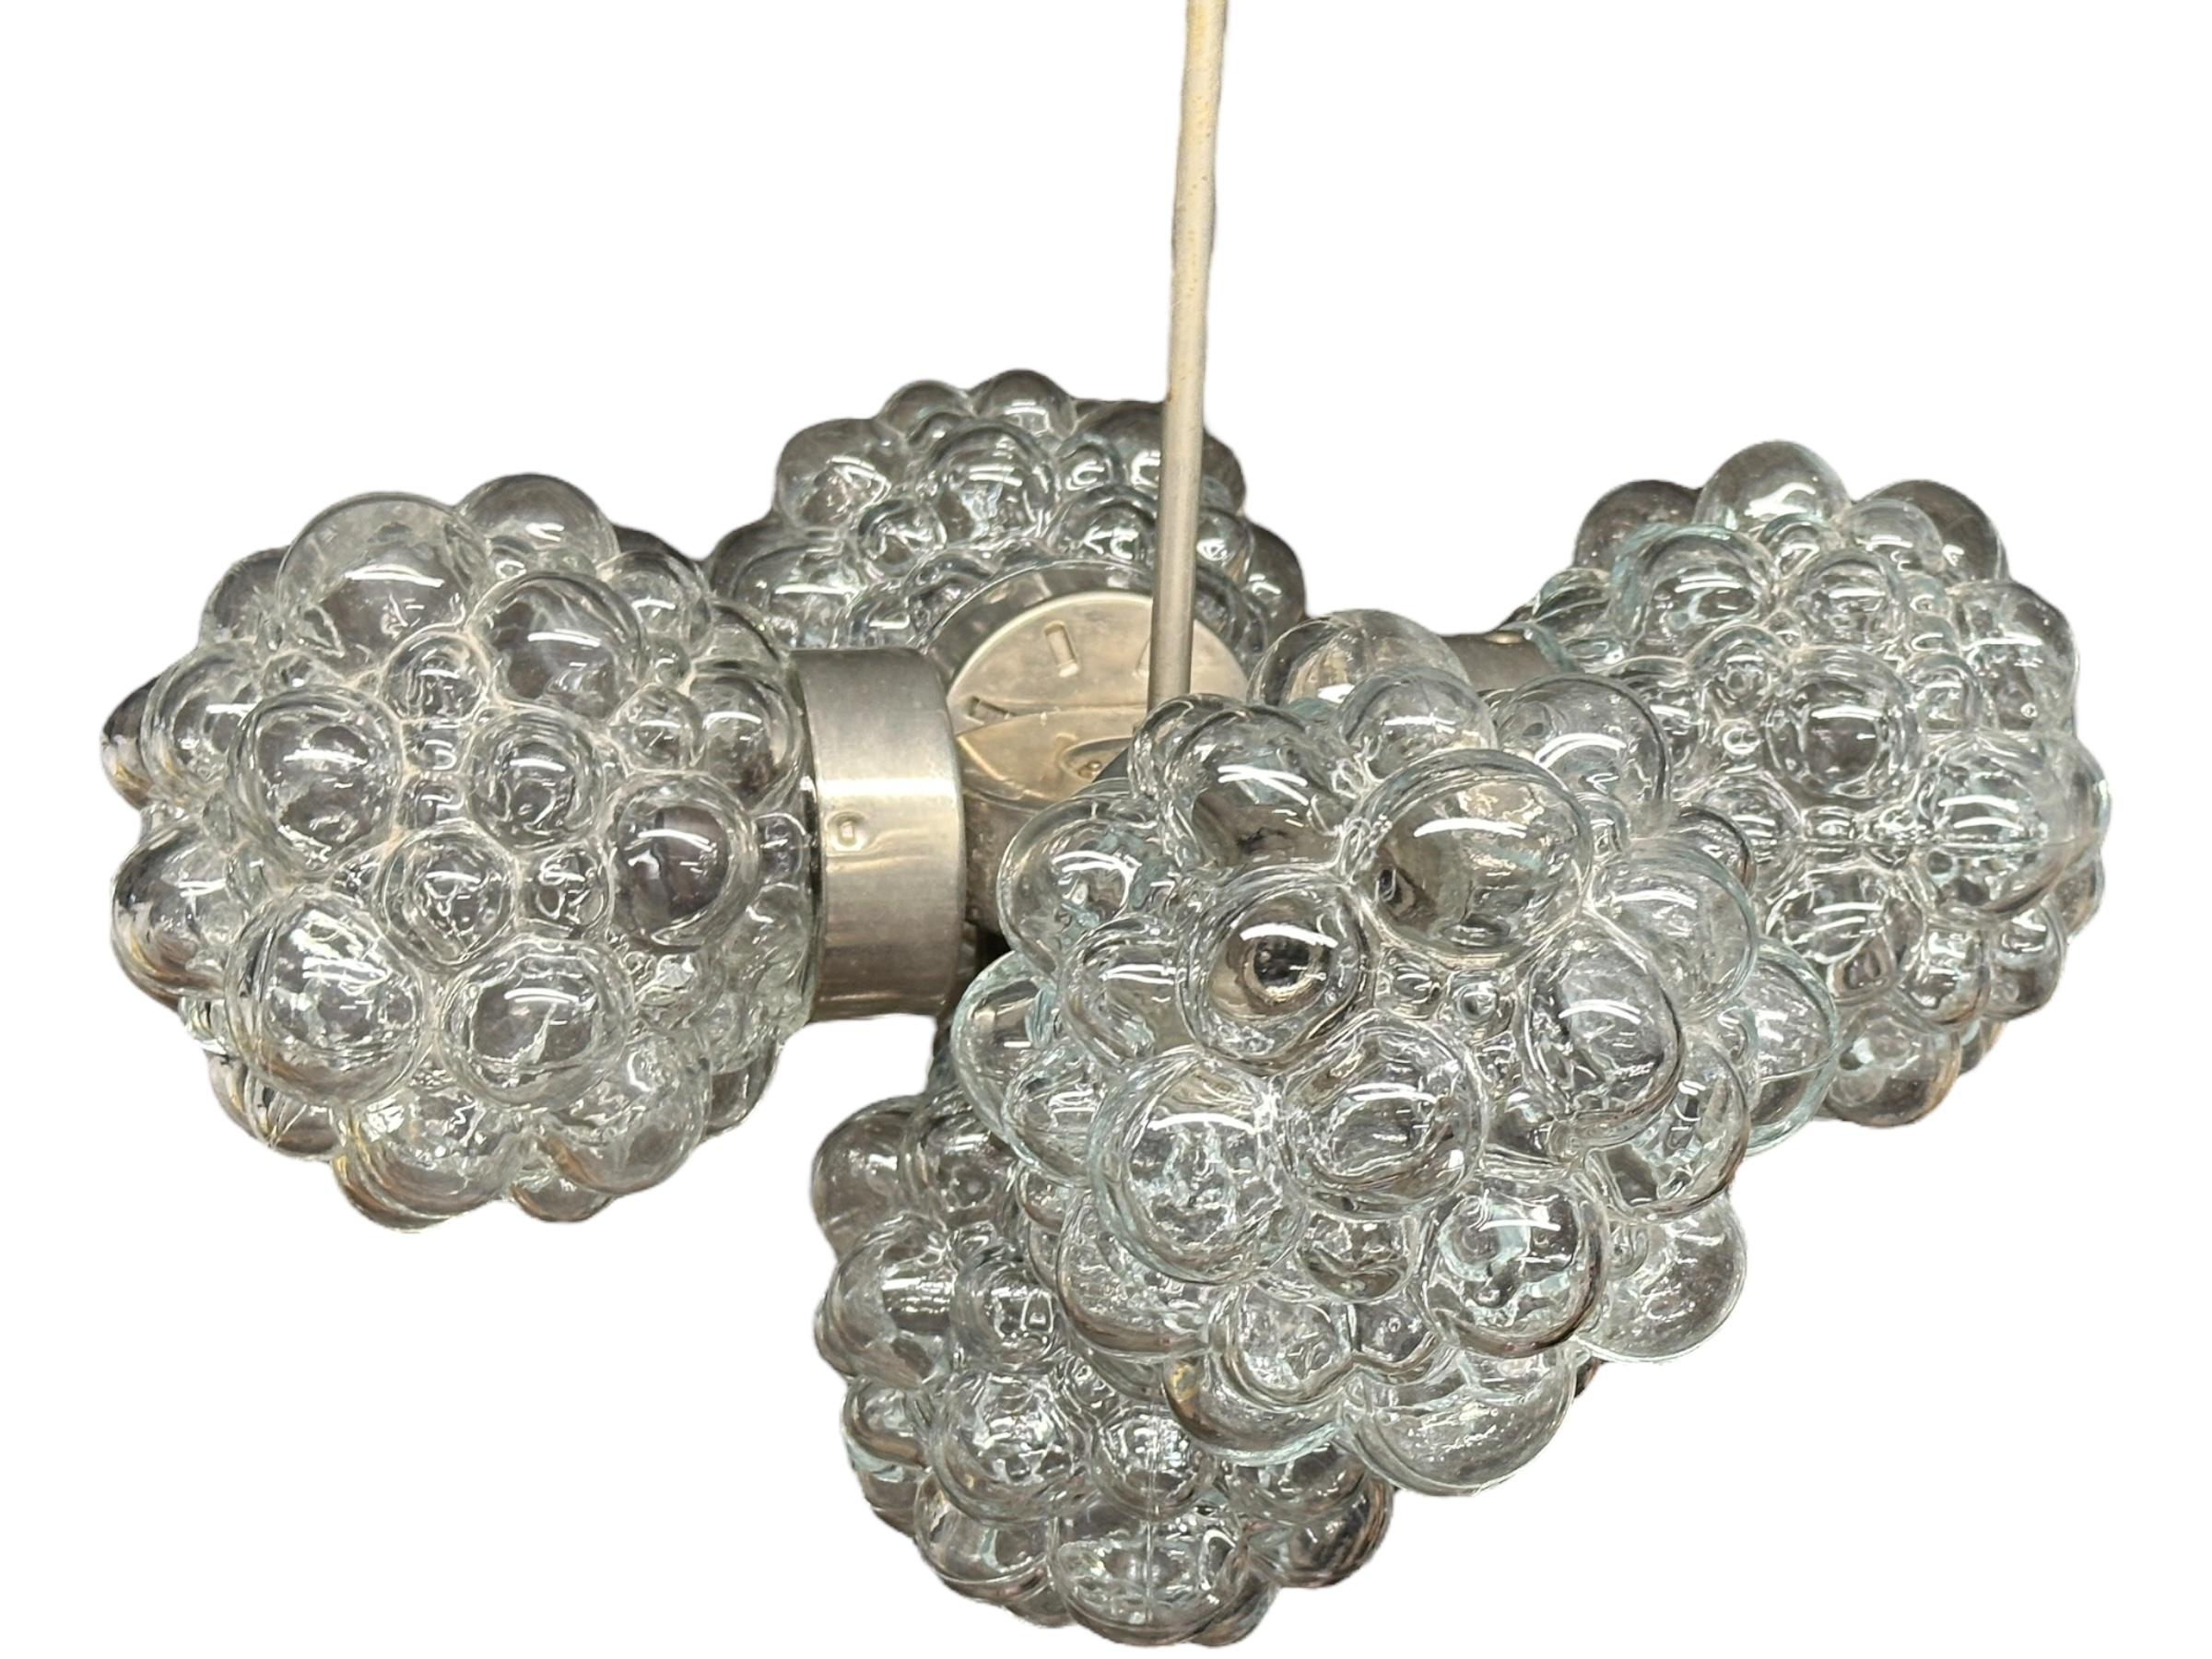 5 Light Bubble Glass Helena Tynell Style Chandelier, Austria 1960s For Sale 6